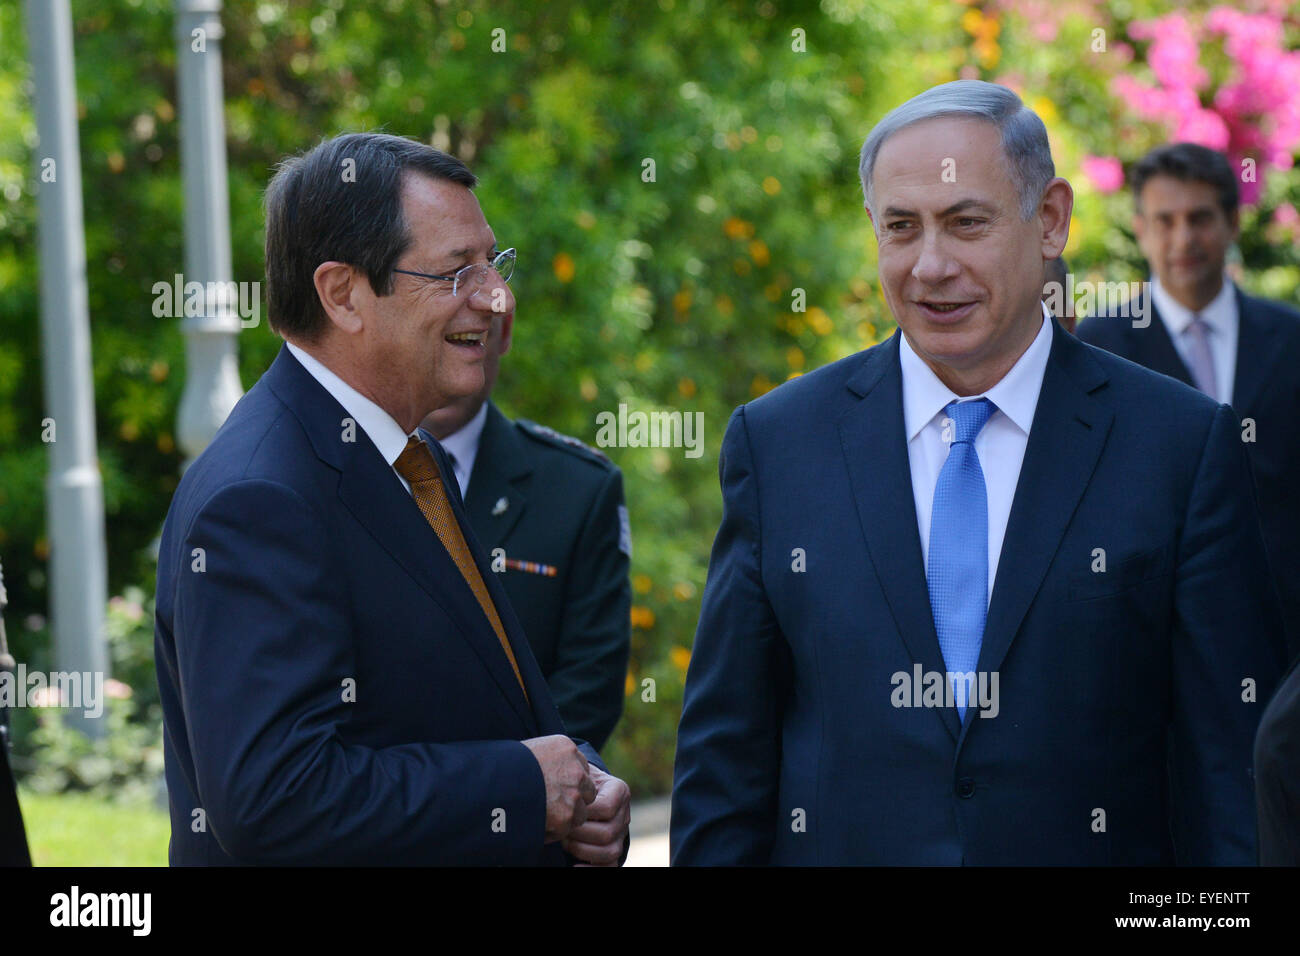 Nicosia, Cyprus. 28th July, 2015. Cyprian President Nicos Anastasiades (L) welcomes Israeli Prime Minister Benjamin Netanyahu during his his official visit in Nicosia, Cyprus, July 28, 2015. Credit:  Stefanos Kouratzis/Xinhua/Alamy Live News Stock Photo